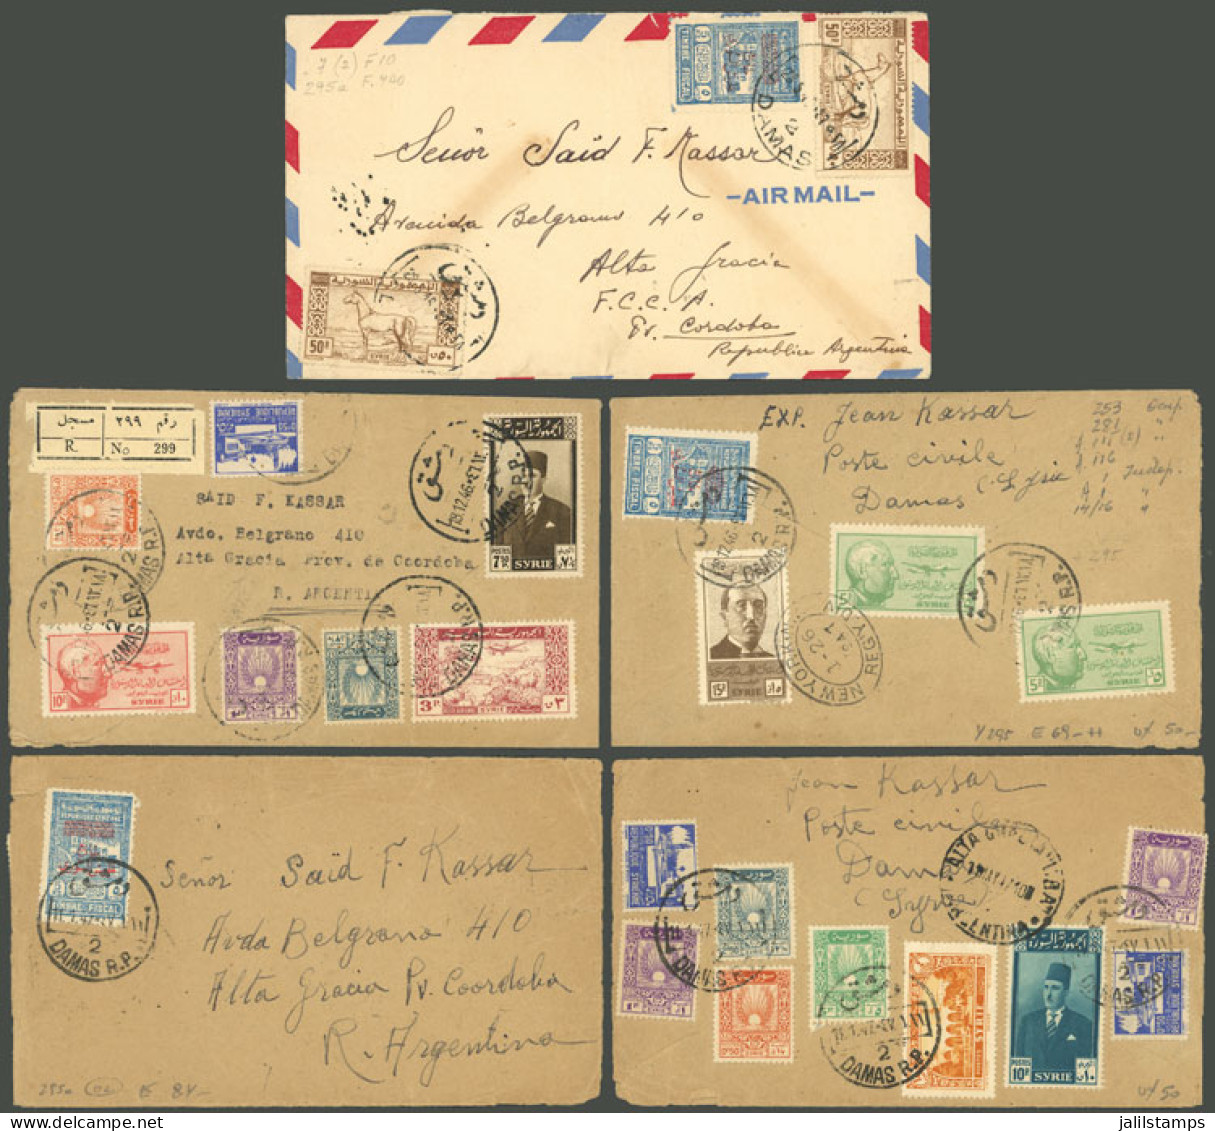 SYRIA: 3 Covers Sent To Argentina In 1946/7, Attractive Frankings, Nice Lot! - Siria